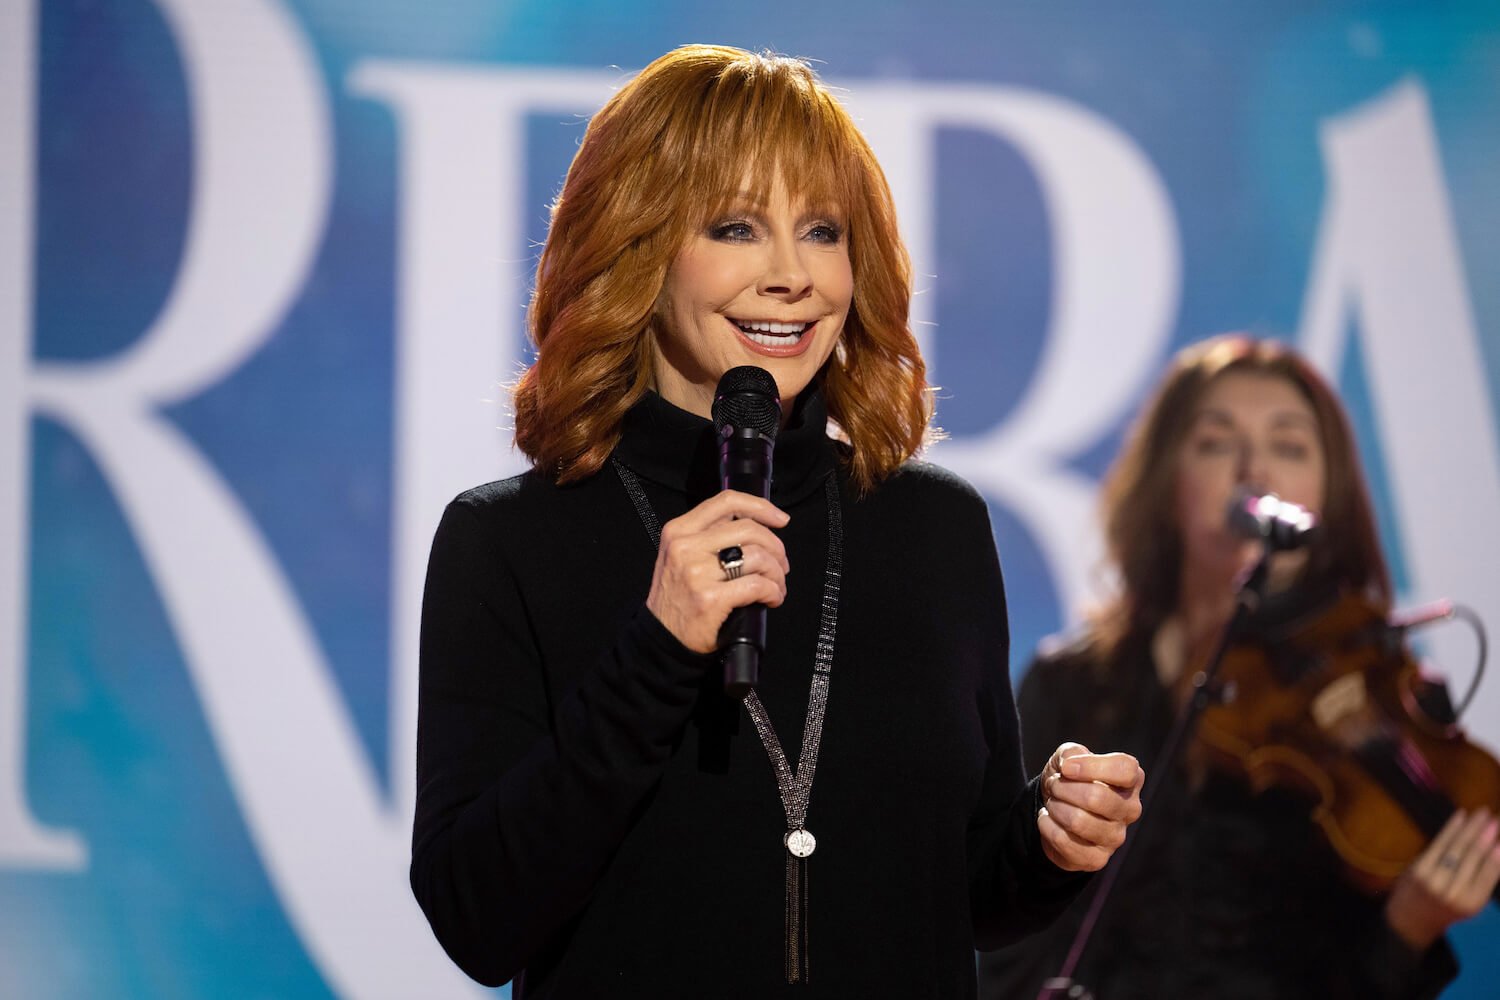 ‘The Voice’ Coach Reba McEntire Pays $100,000 Per Year to Look Young, Sources Claim